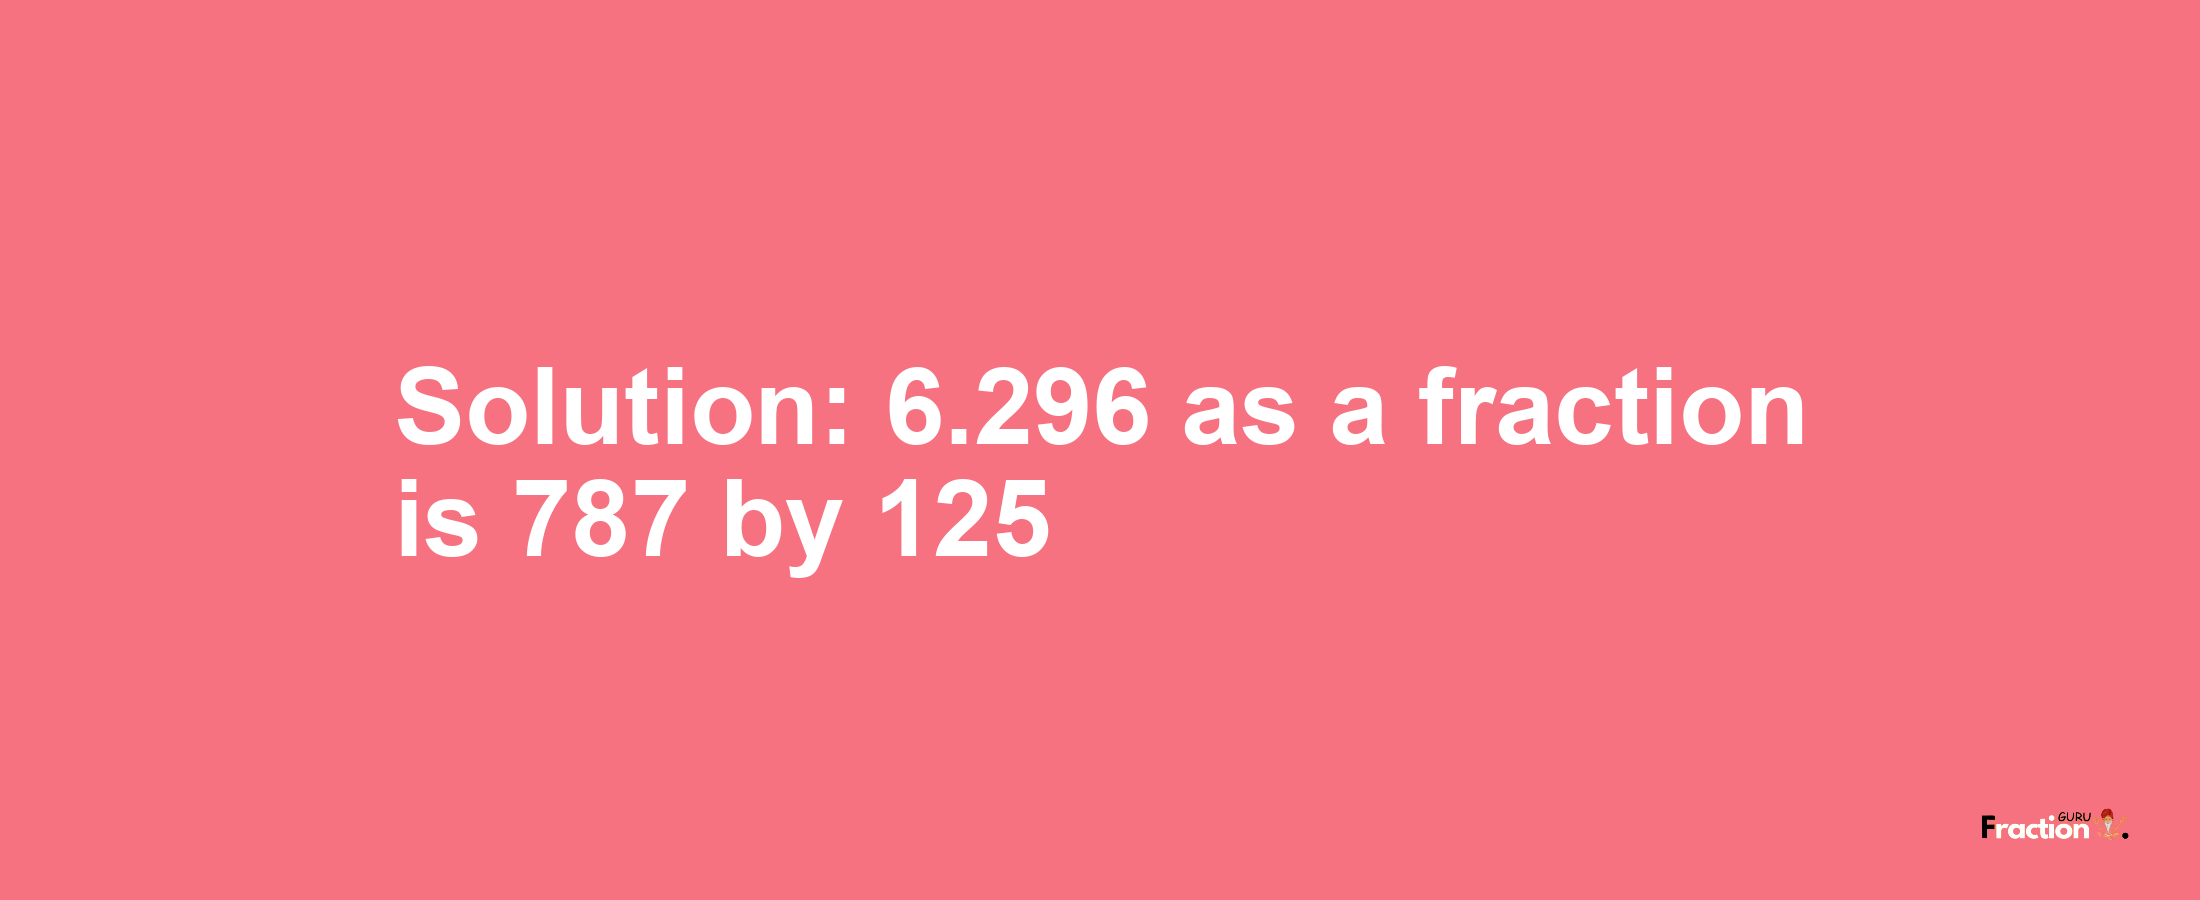 Solution:6.296 as a fraction is 787/125